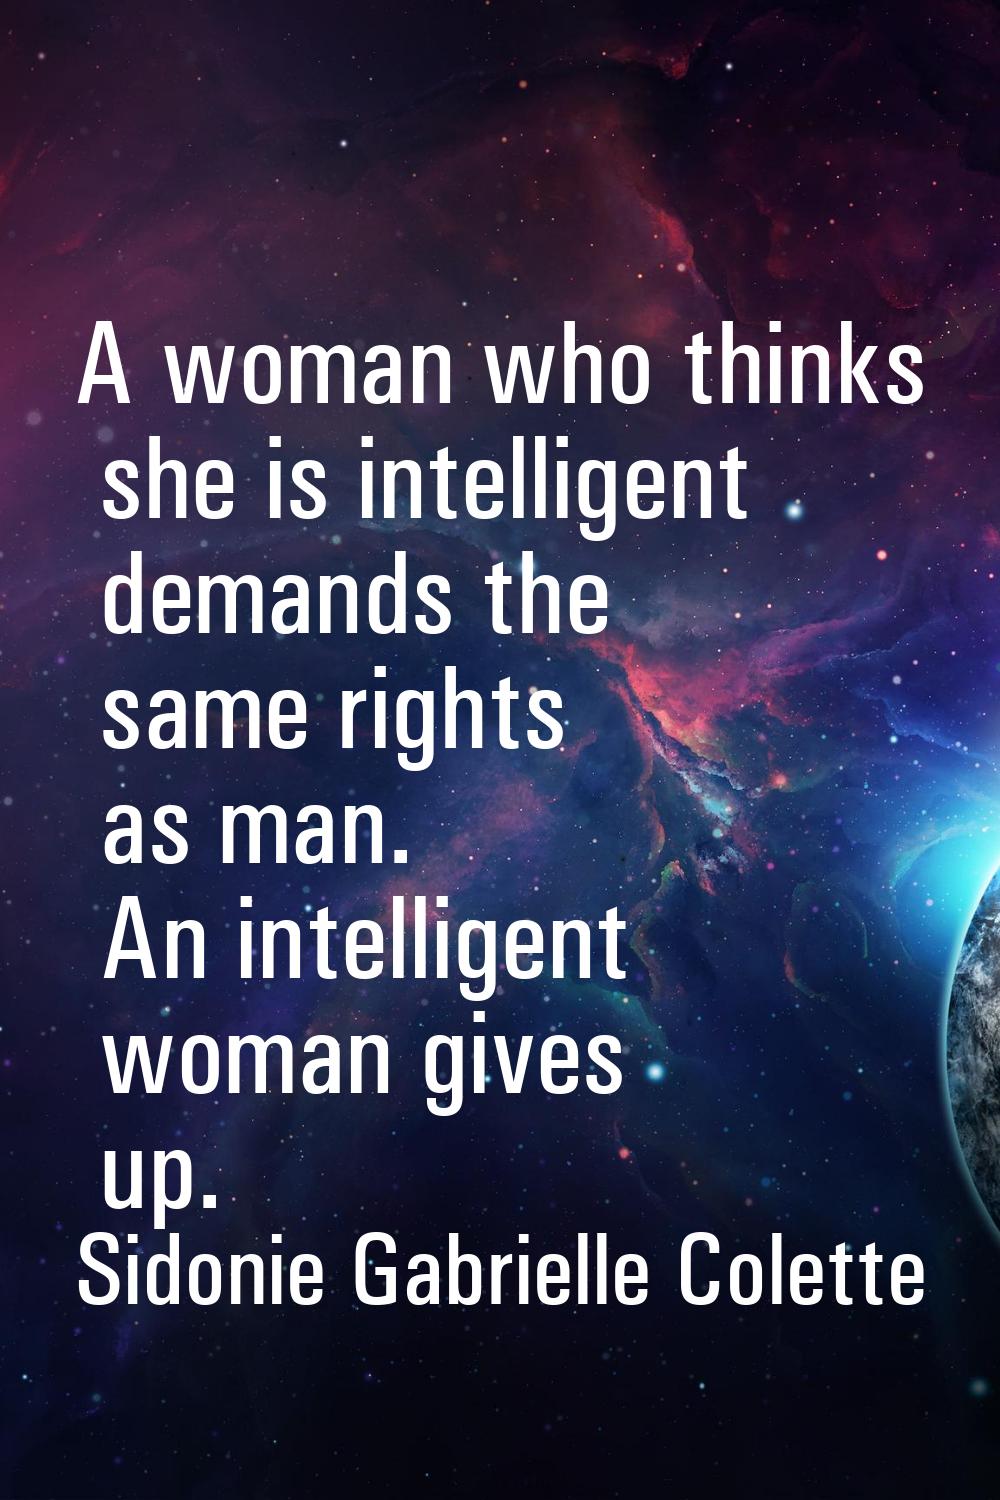 A woman who thinks she is intelligent demands the same rights as man. An intelligent woman gives up